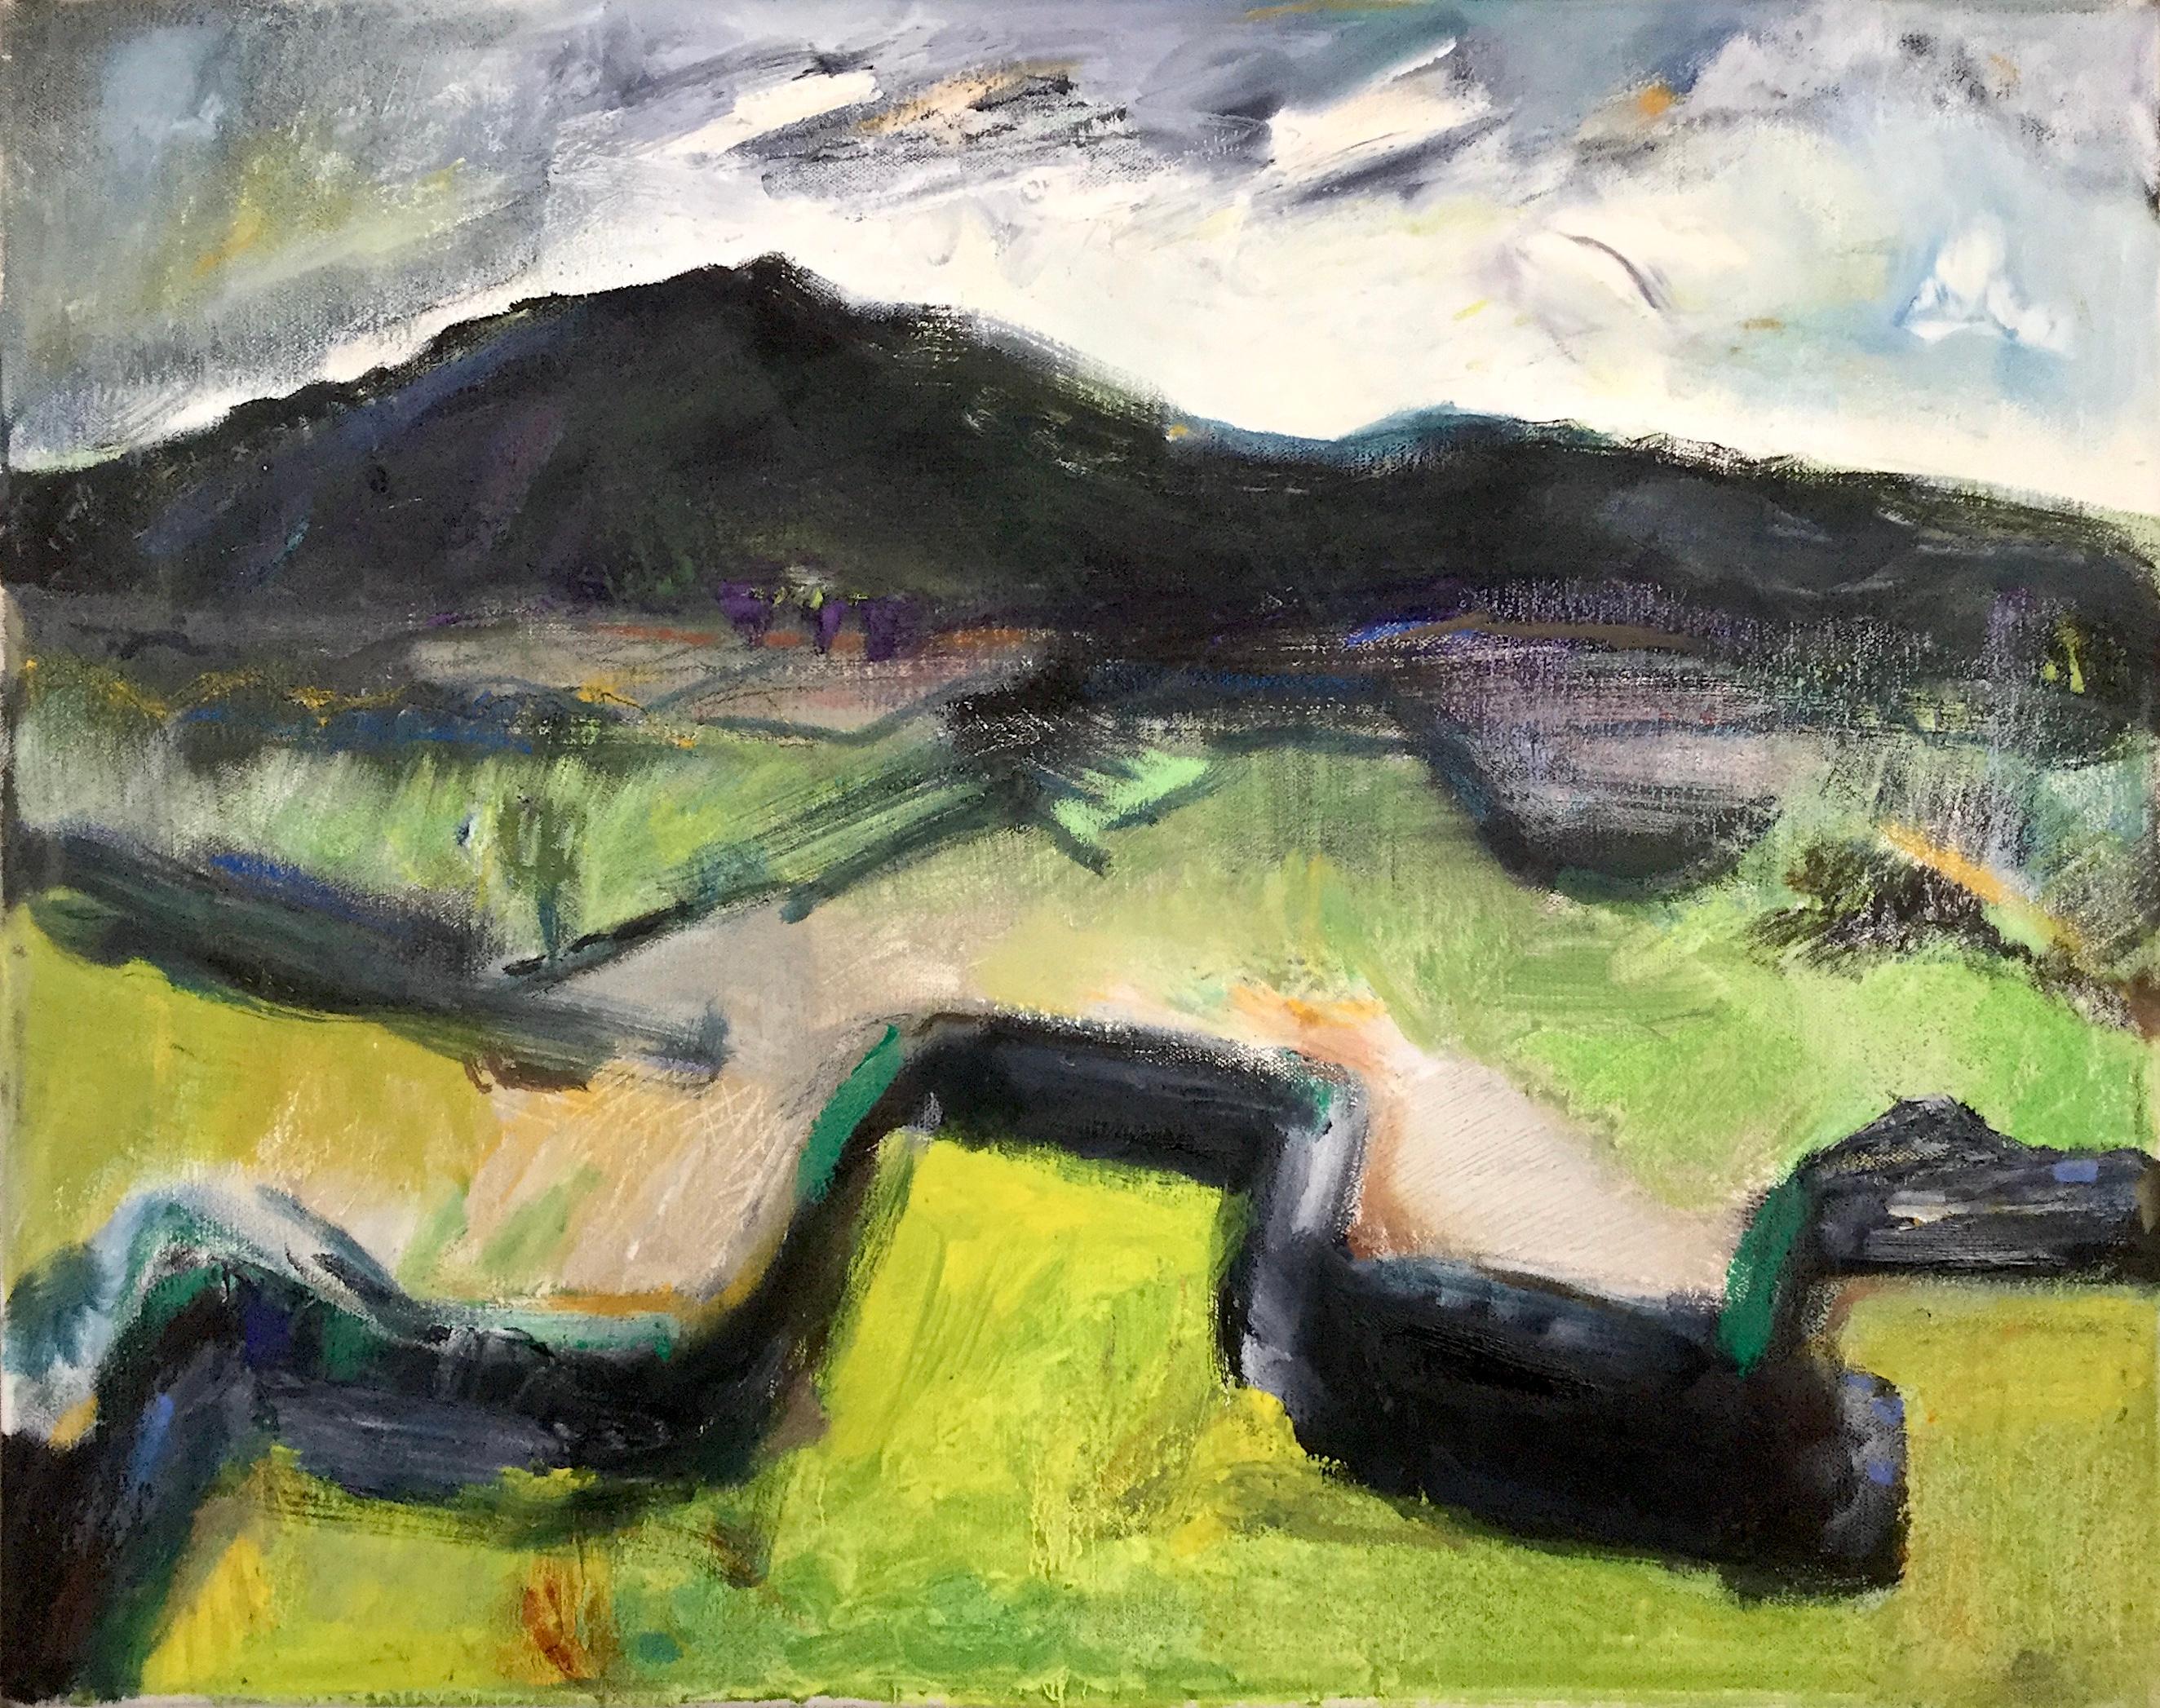 Walled Landscape. Contemporary welsh Abstract Expressionist Landscape Painting